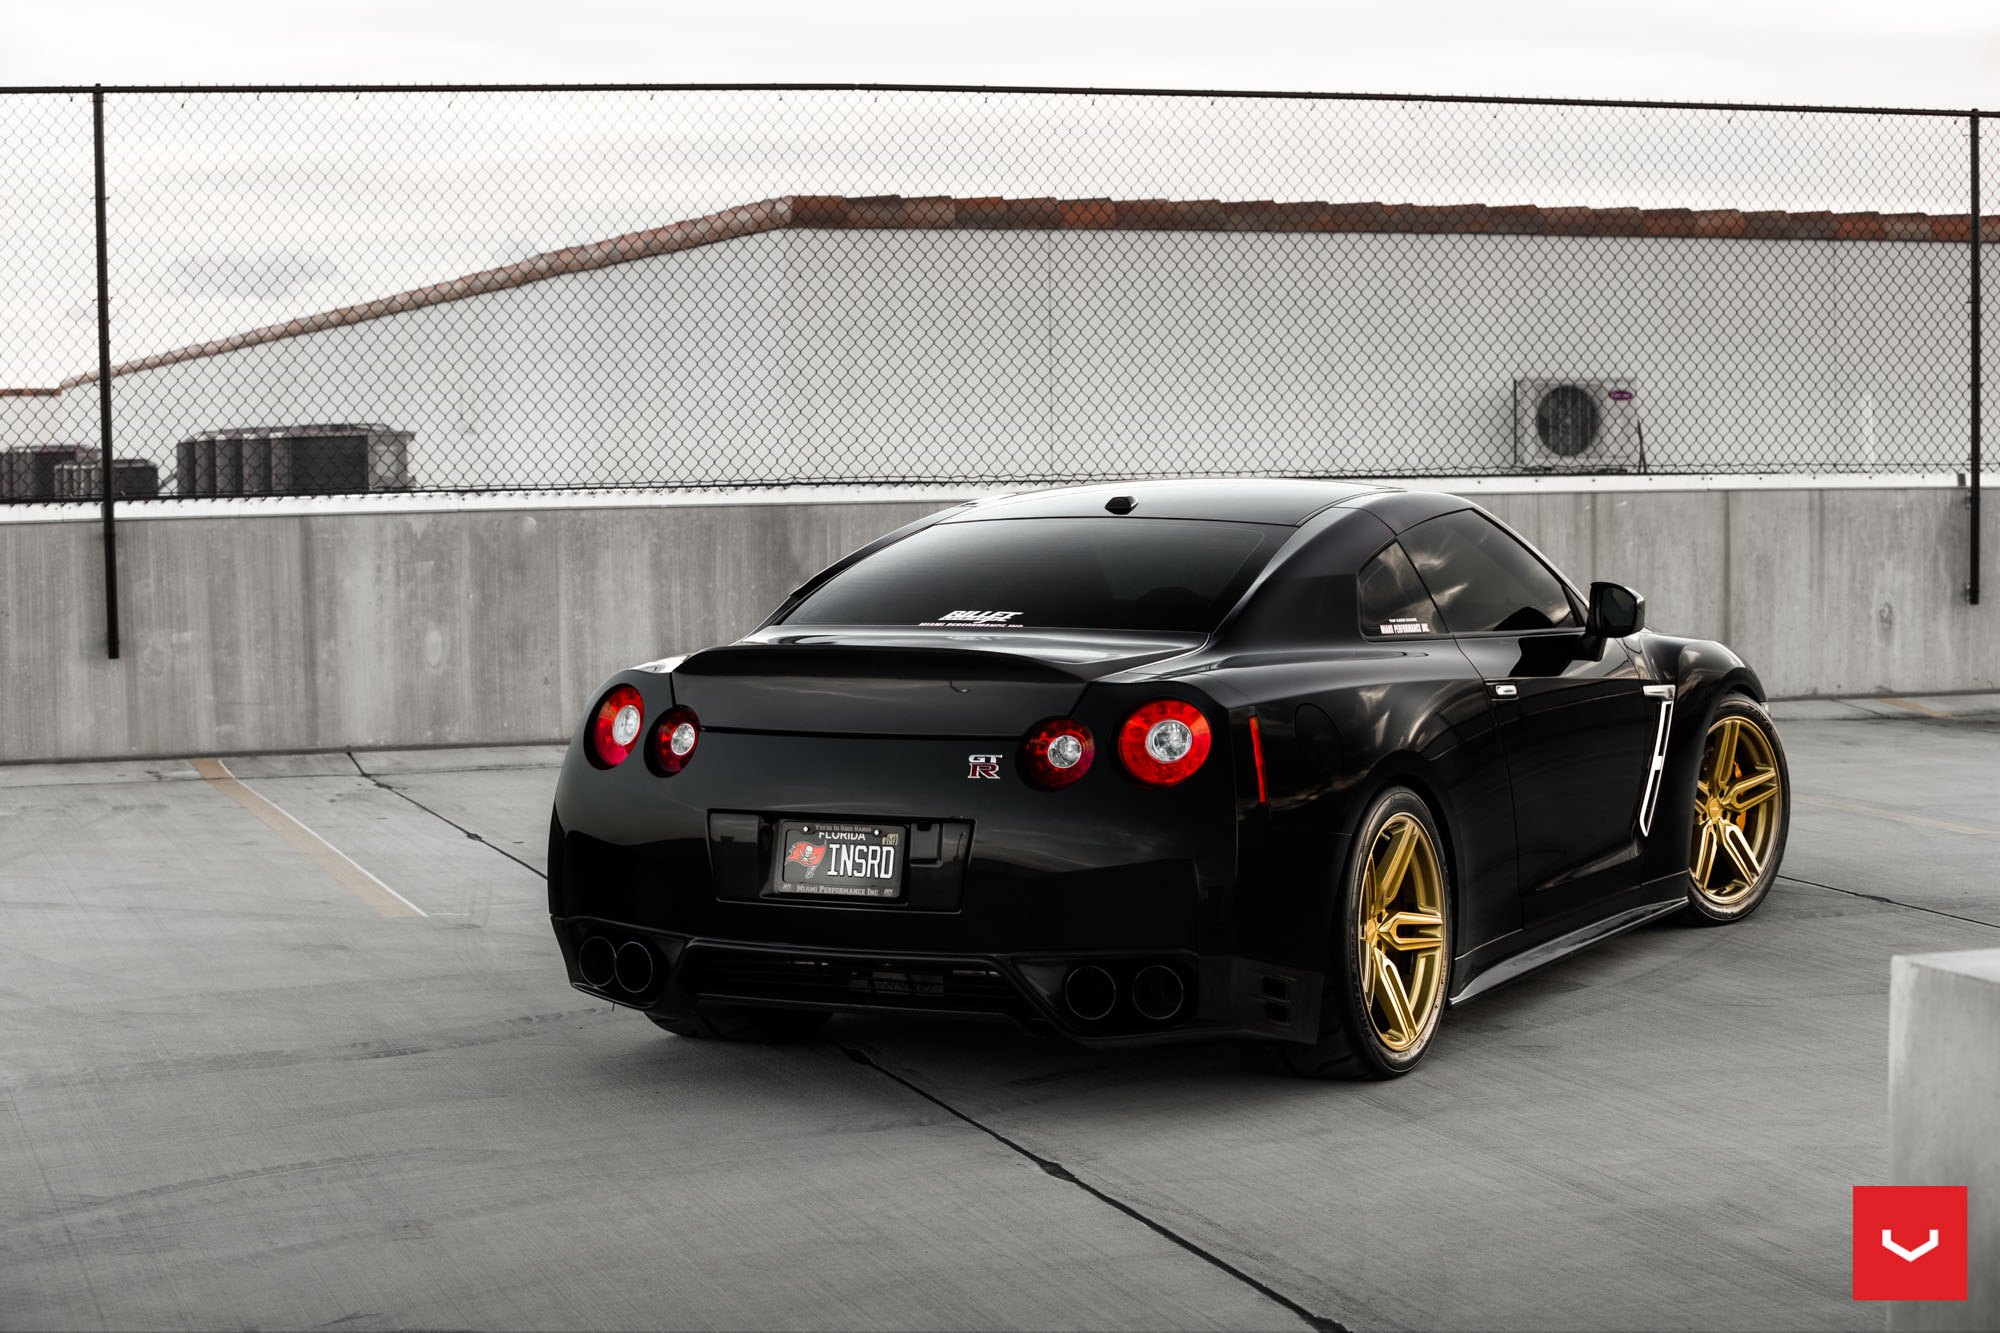 Red Clear LED Taillights on Black Nissan GT-R - Photo by Vossen